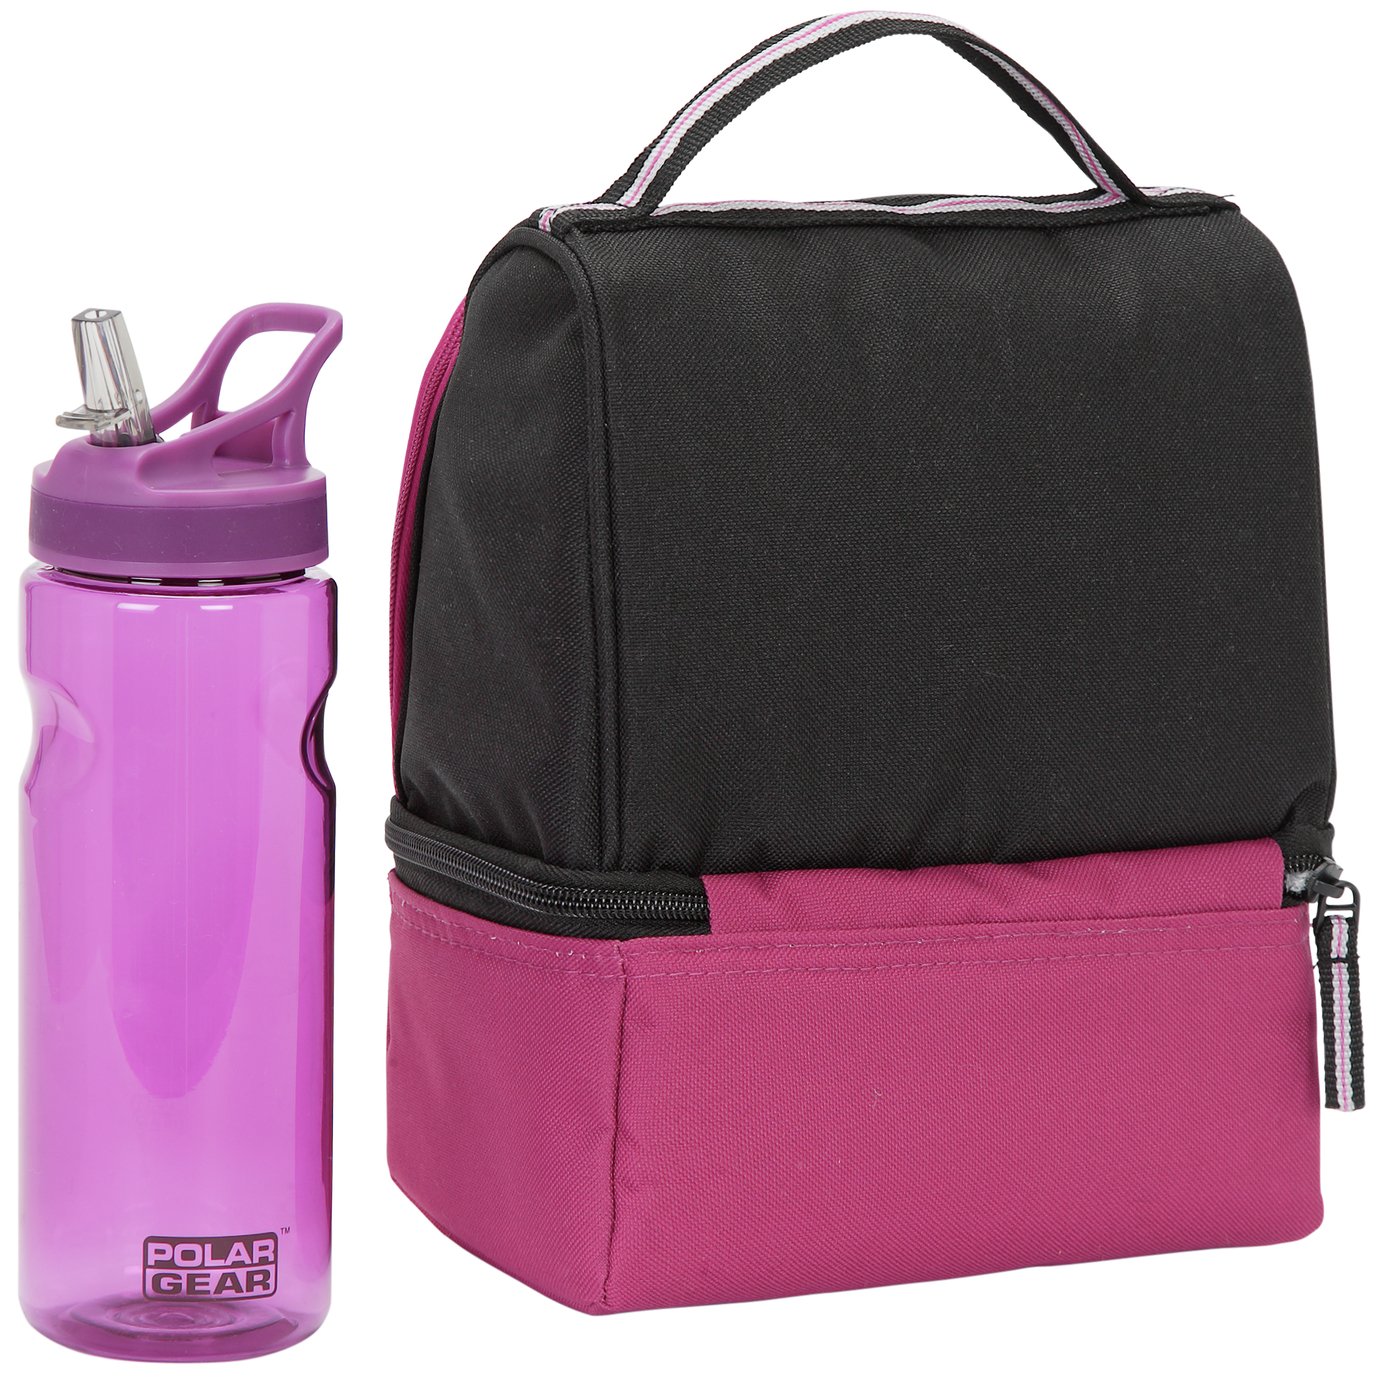 Polar Gear Lunch Bag and Bottle Reviews